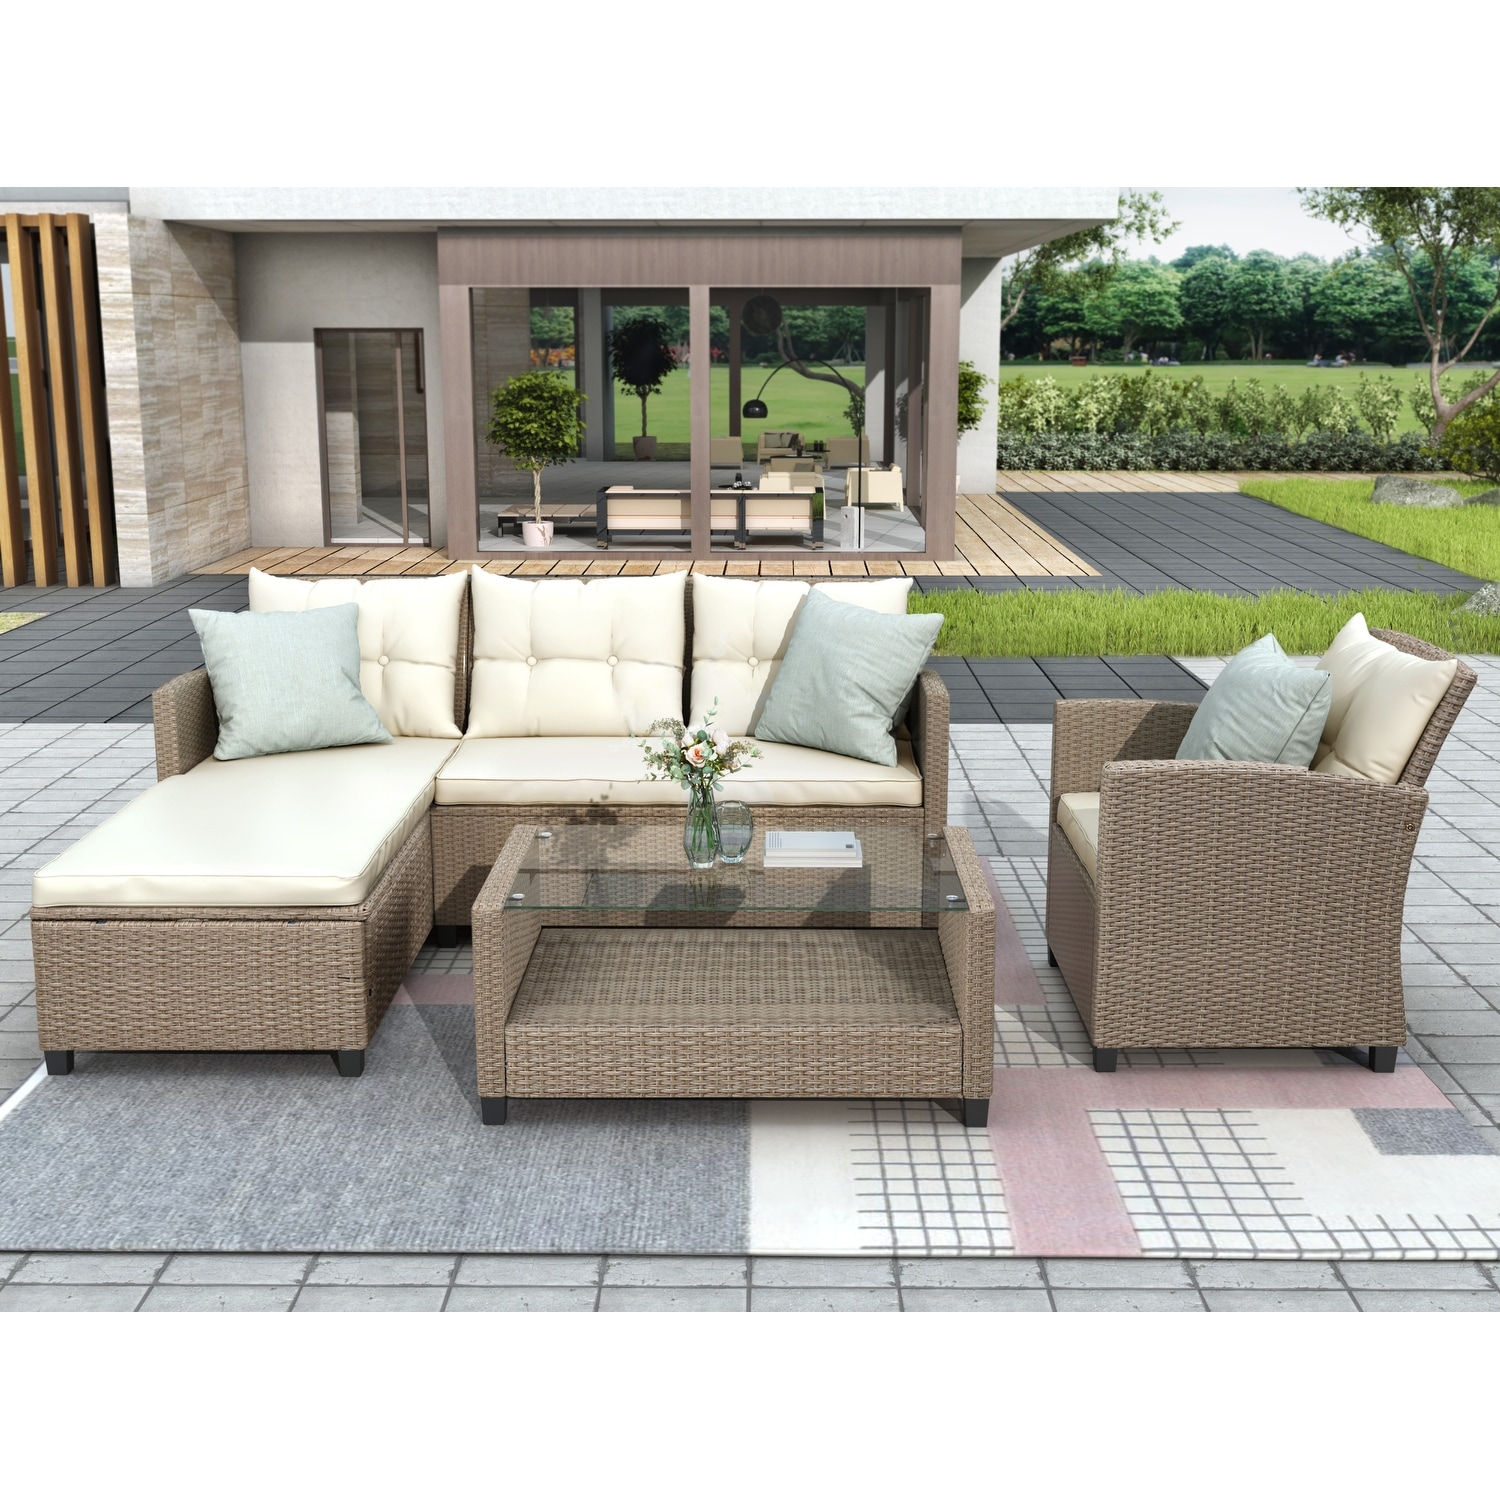 4 Piece Conversation Set Wicker Ratten Sectional Sofa With Seat And Table